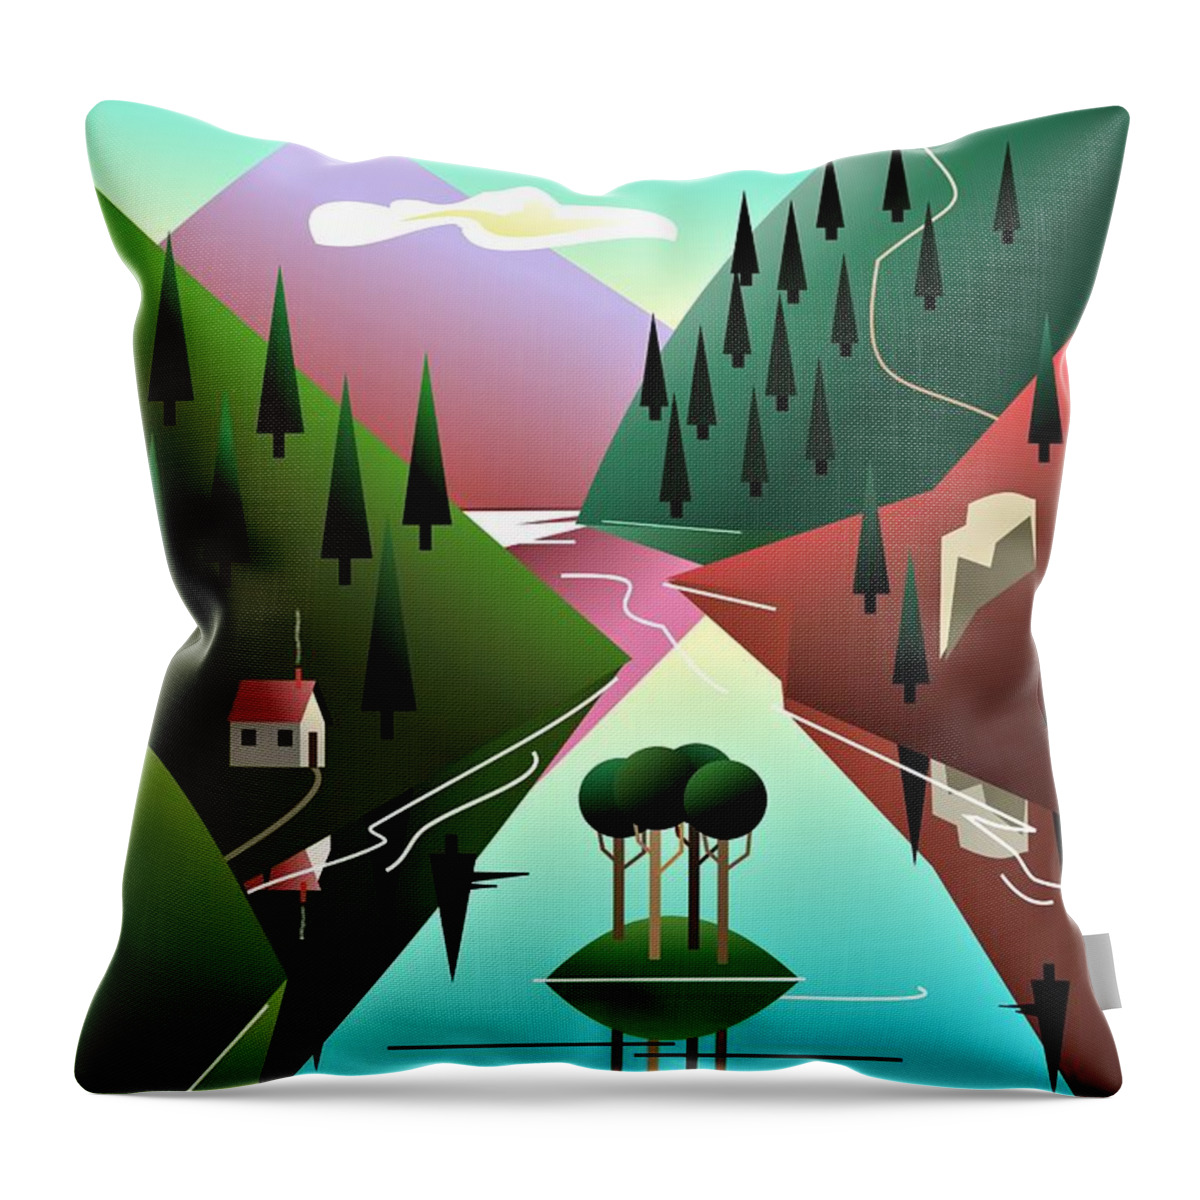 Lake Throw Pillow featuring the digital art Lake District. by Fatline Graphic Art